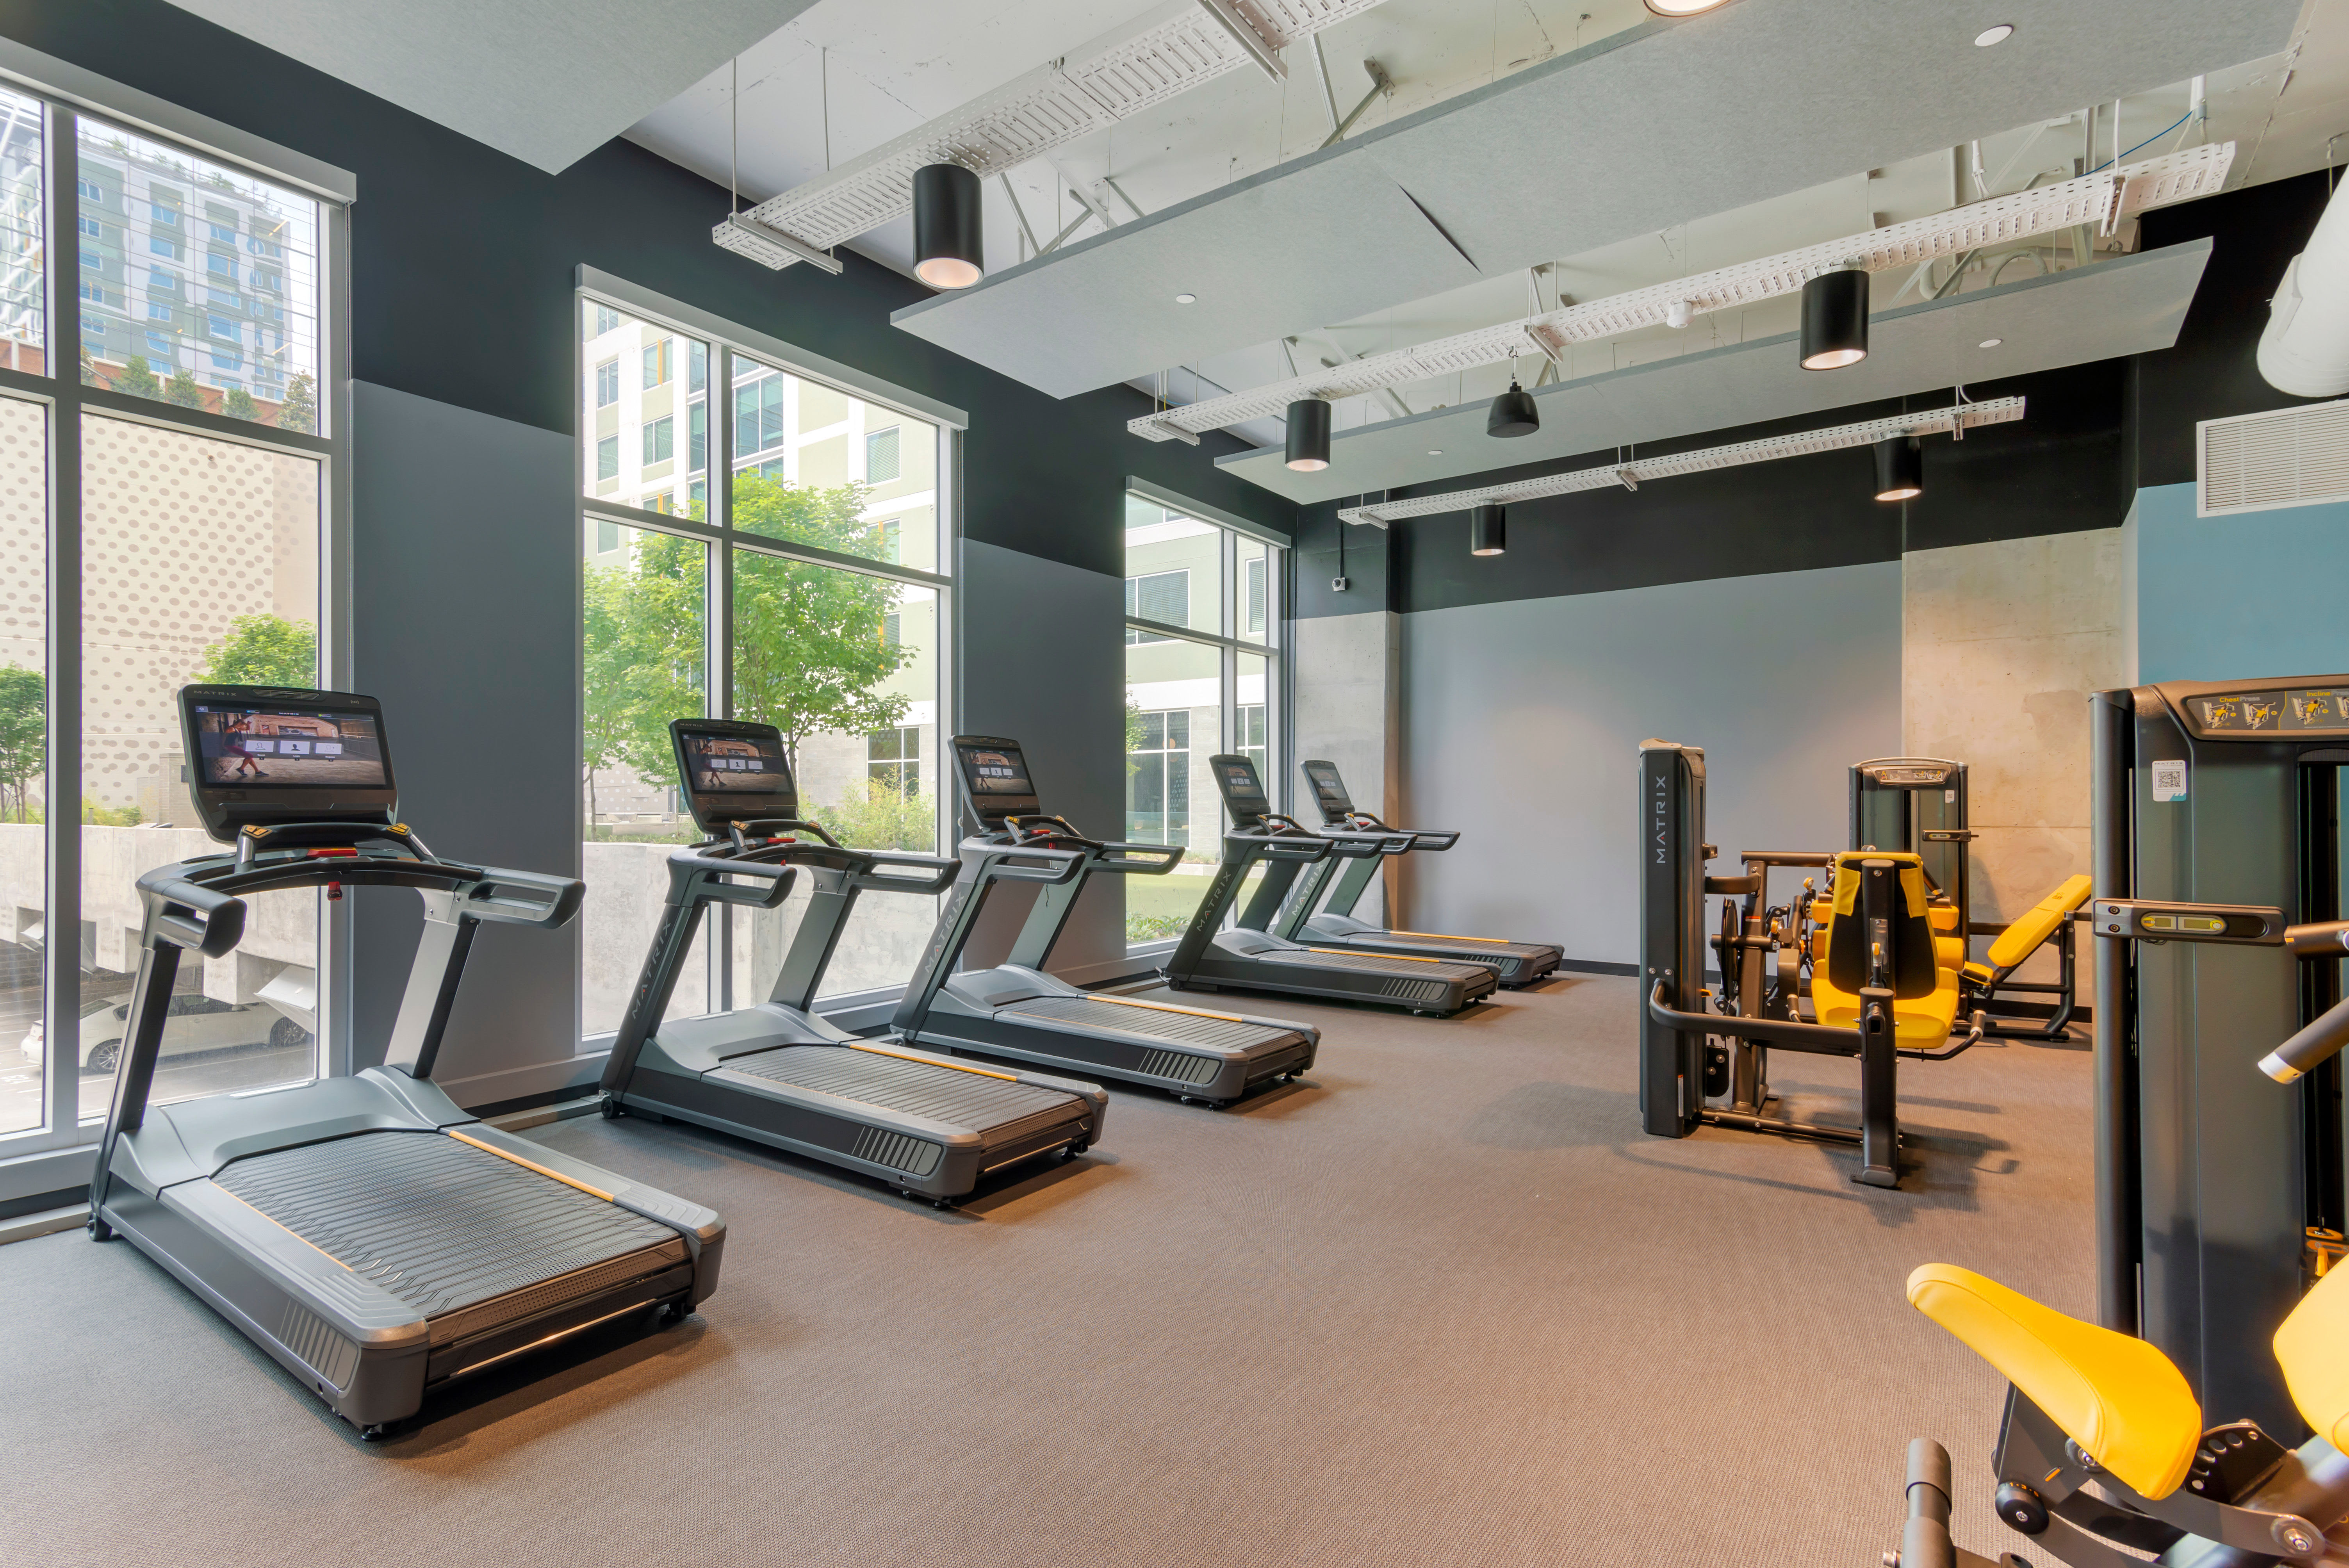 State of the art fitness center treadmills for student residents at HERE Atlanta in Atlanta, Georgia